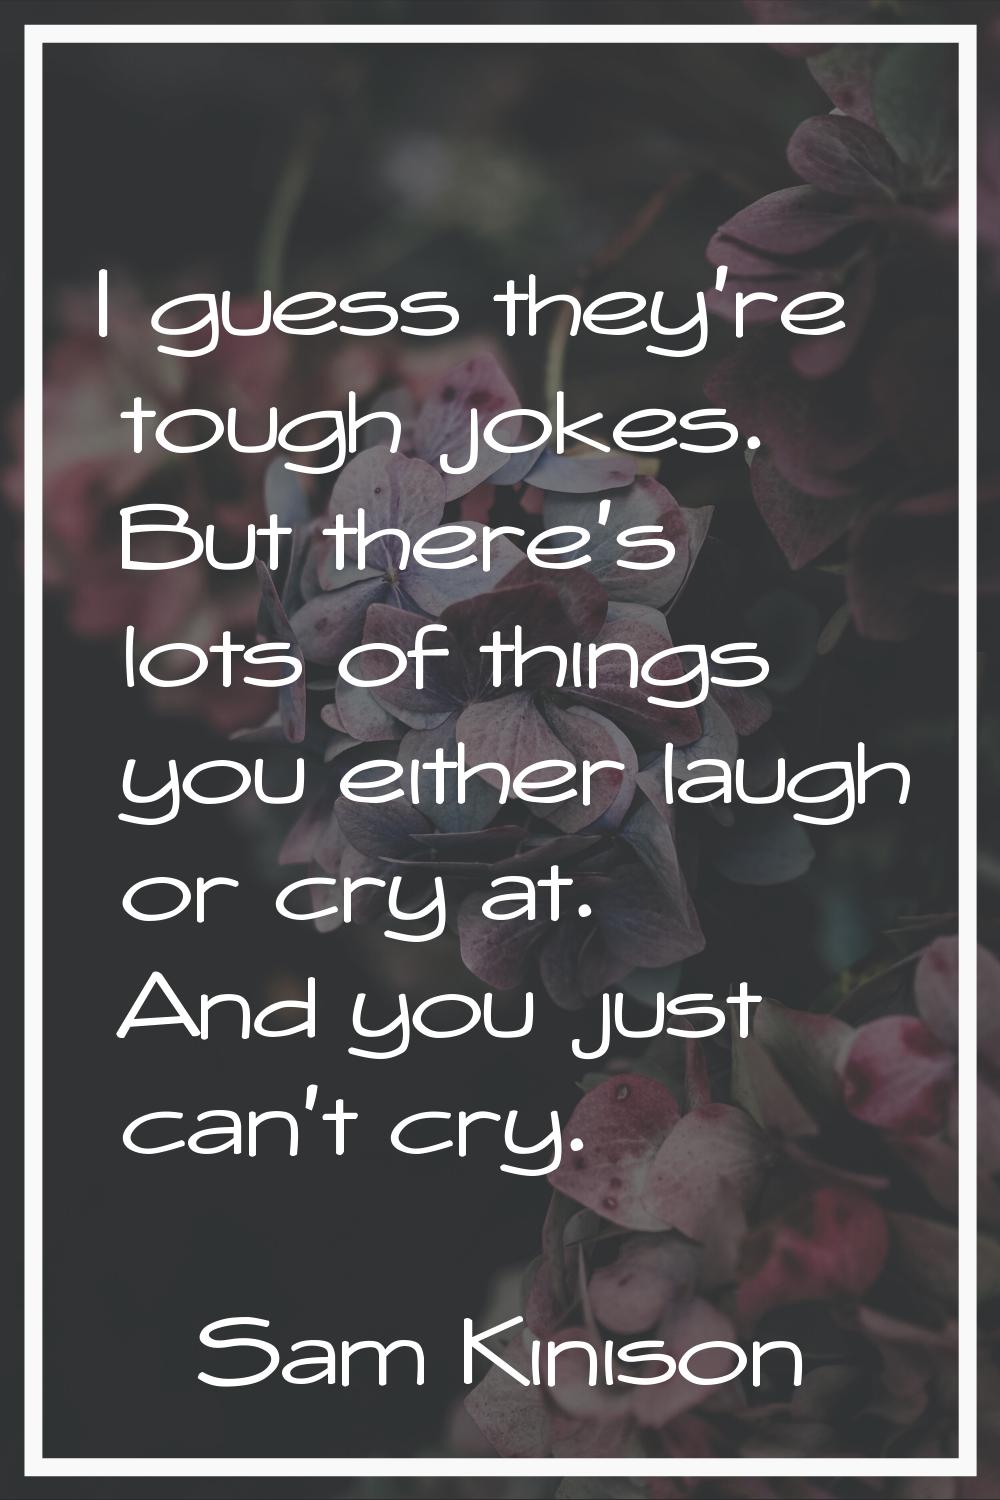 I guess they're tough jokes. But there's lots of things you either laugh or cry at. And you just ca